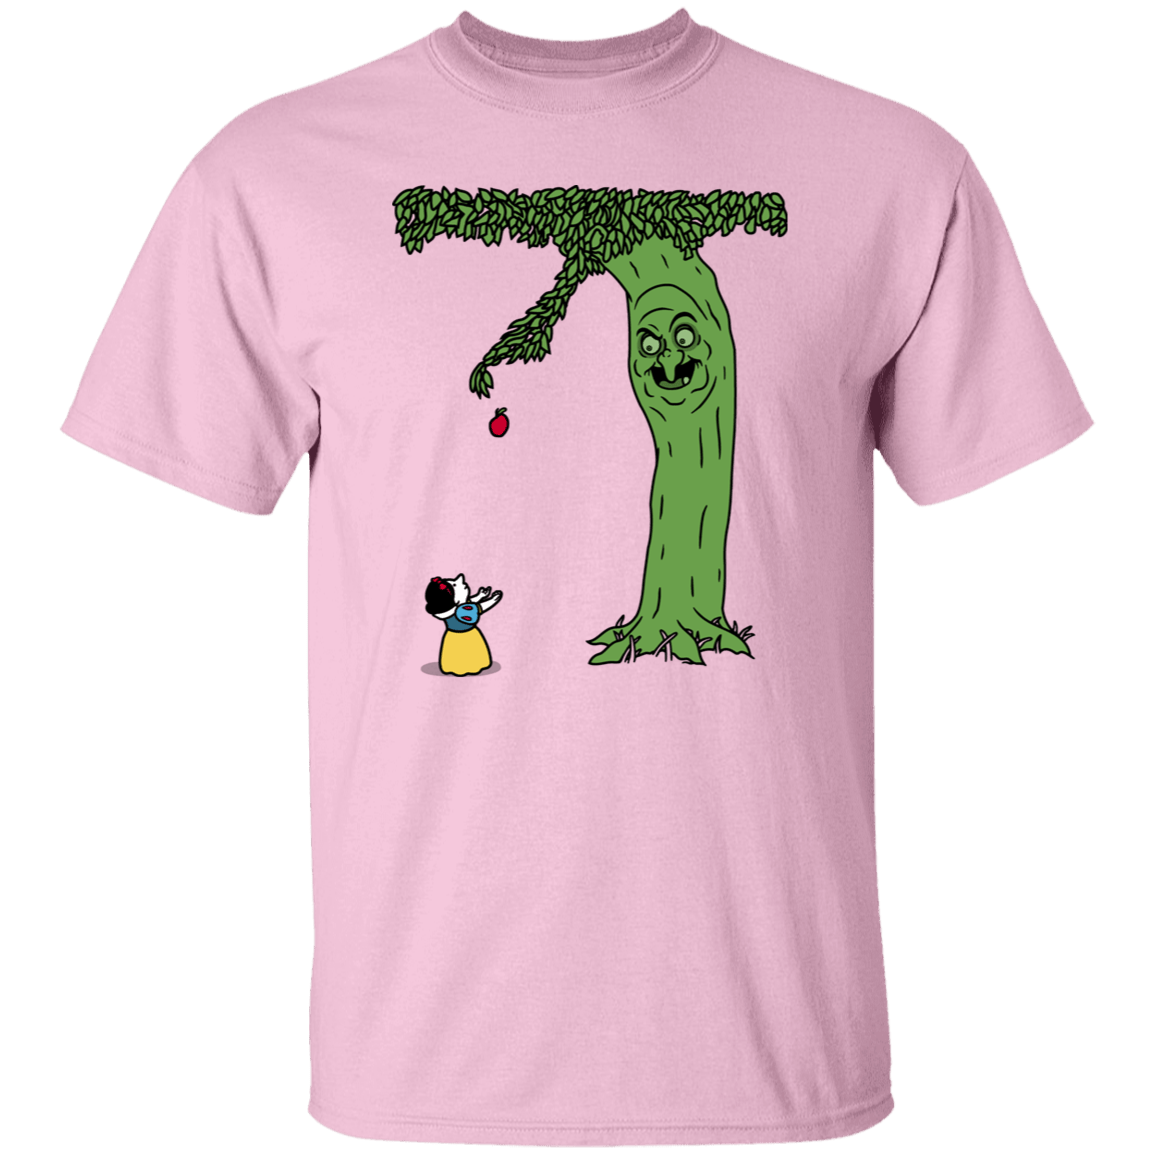 T-Shirts Light Pink / S The Giving Witch T-Shirt